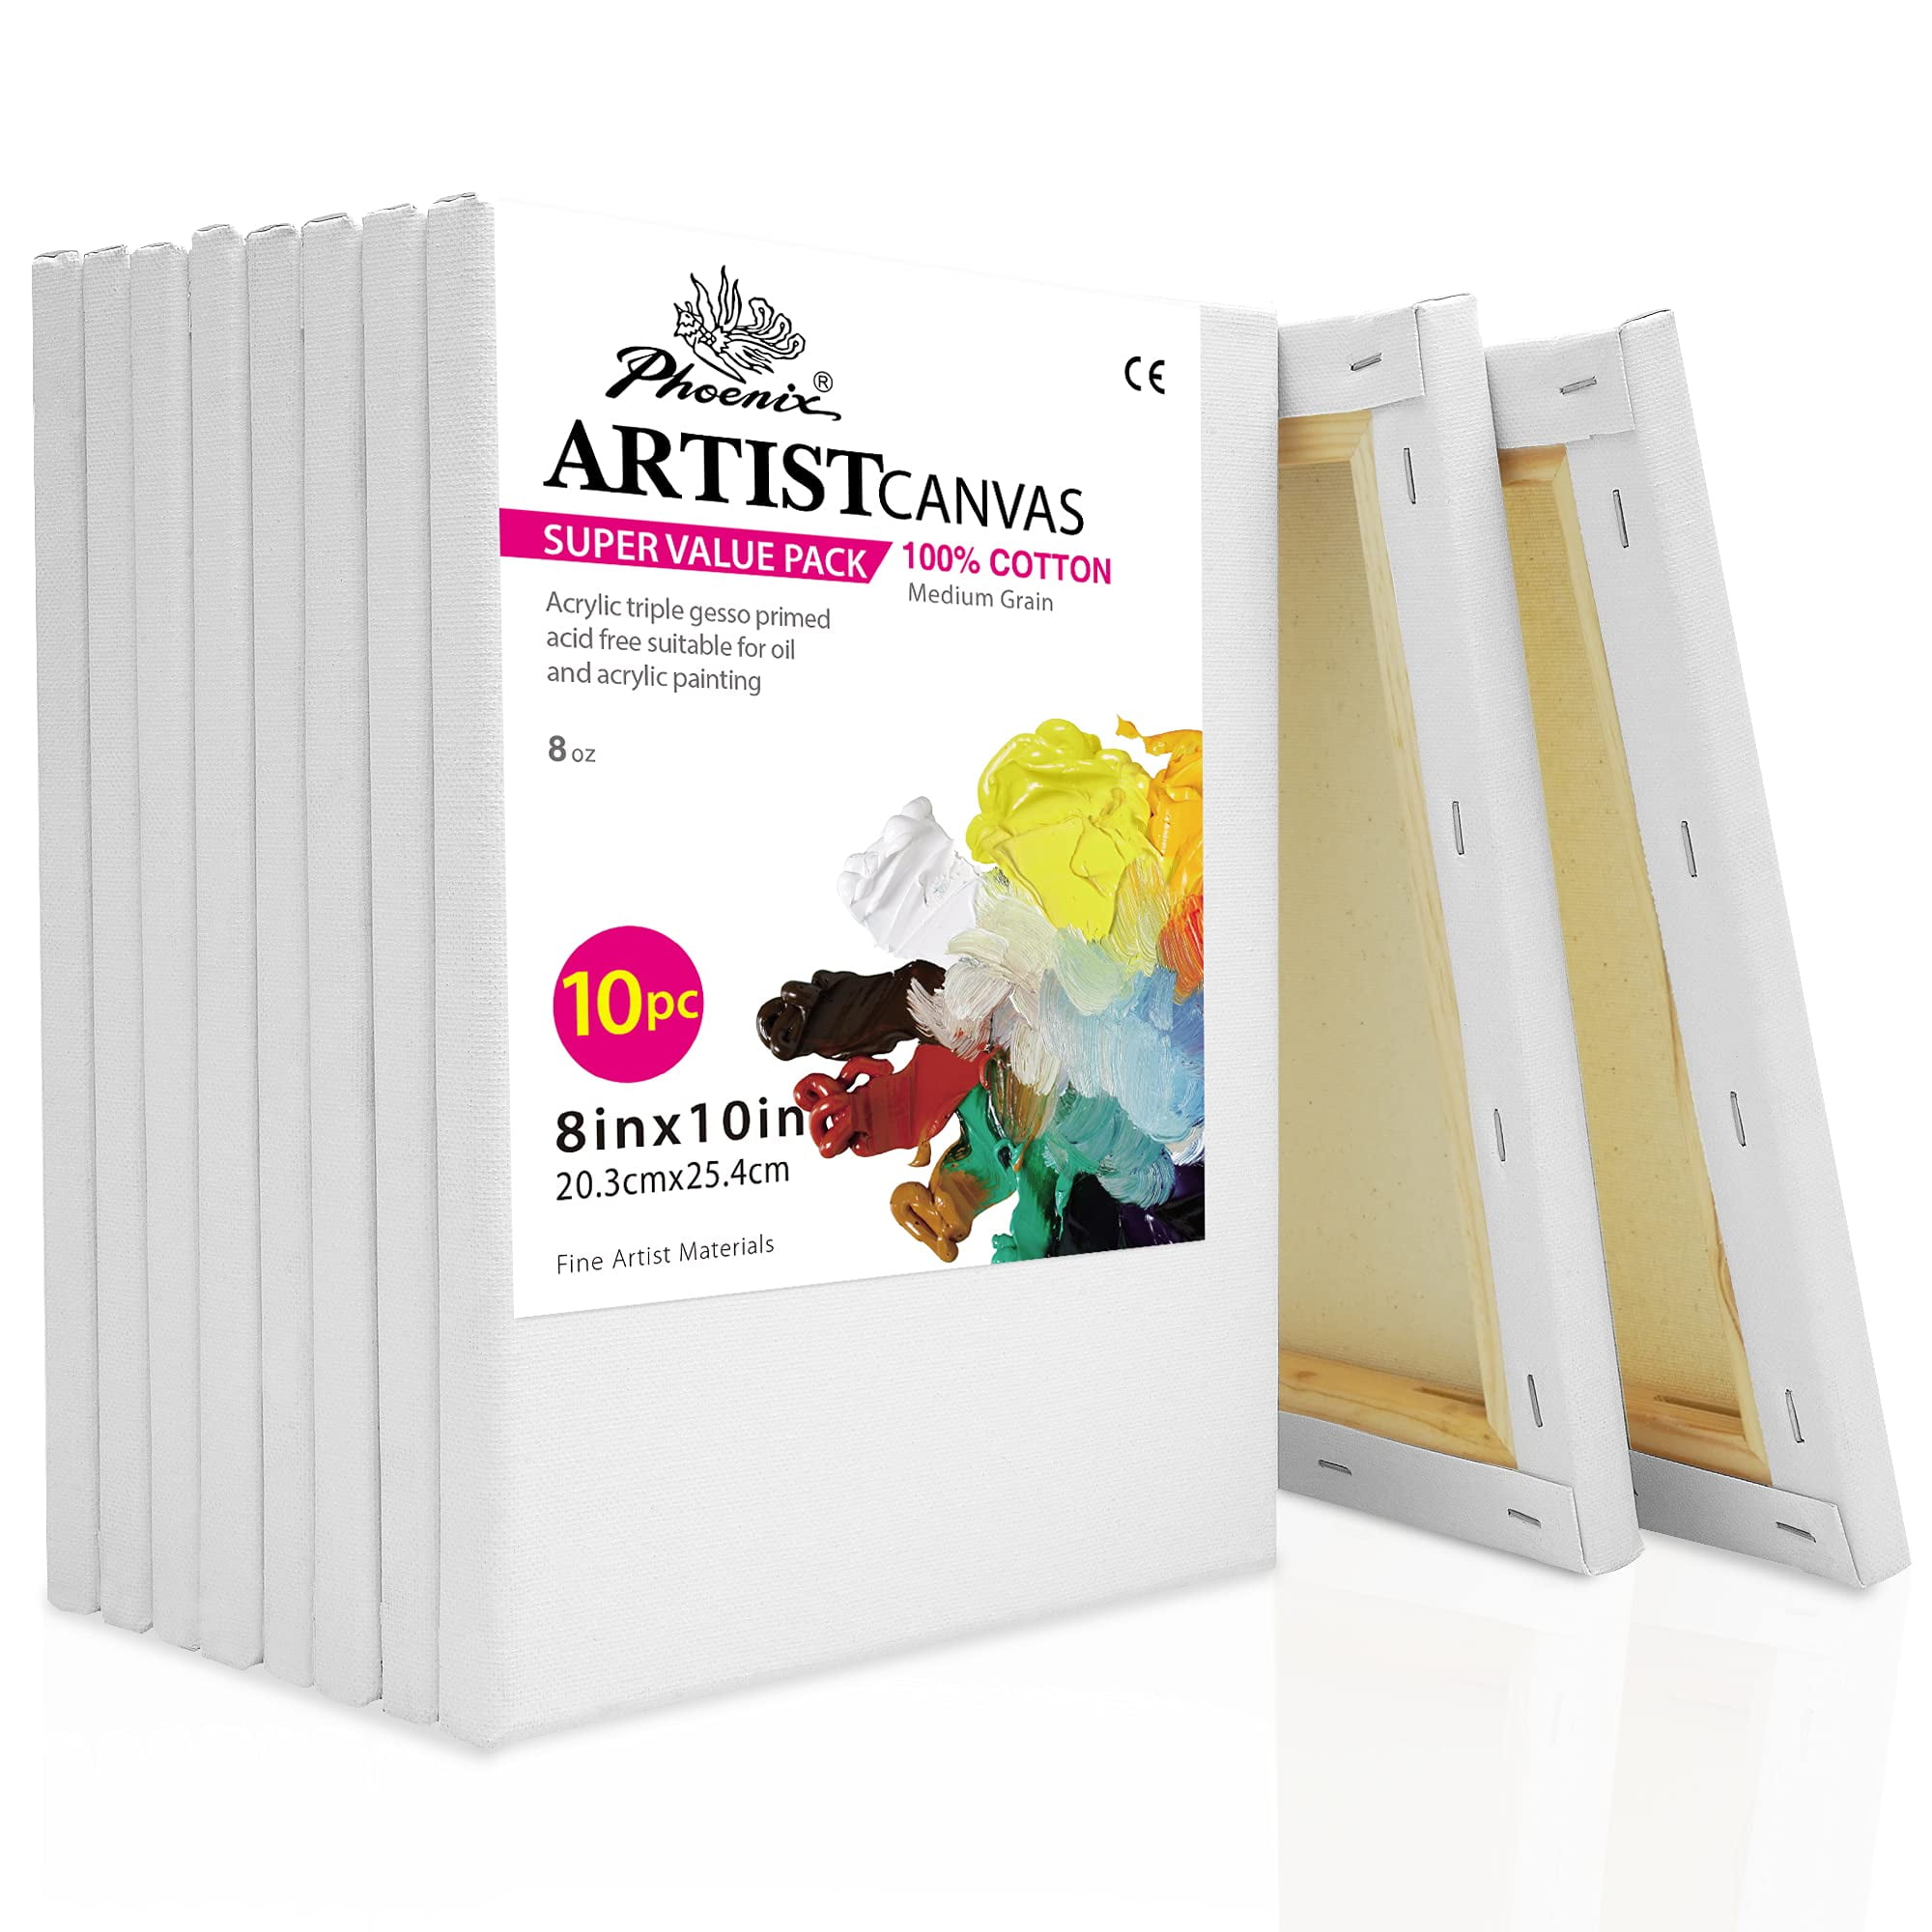 Phoenix Extra Large Blank Canvas 24x36 inch - 4 Pack 100% Cotton 12 oz. Triple Primed Pre Gessoed White Stretched Canvases for Painting - Ready to